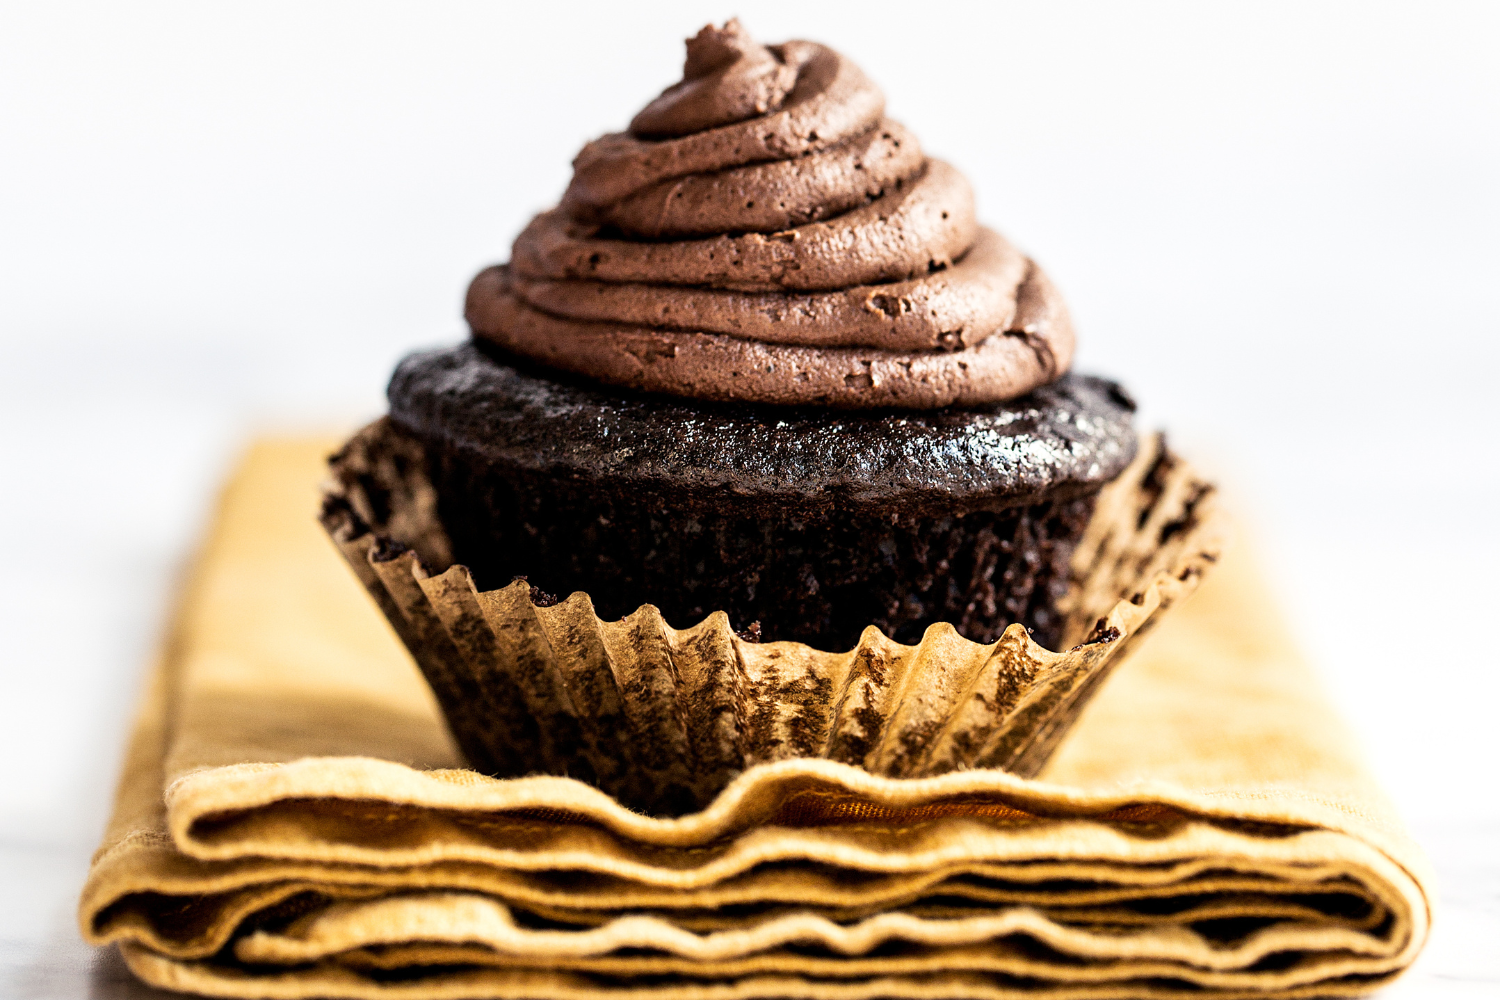 a chocolate blackout cupcake in a gold liner on top of a deep yellow napkin, ready to serve.